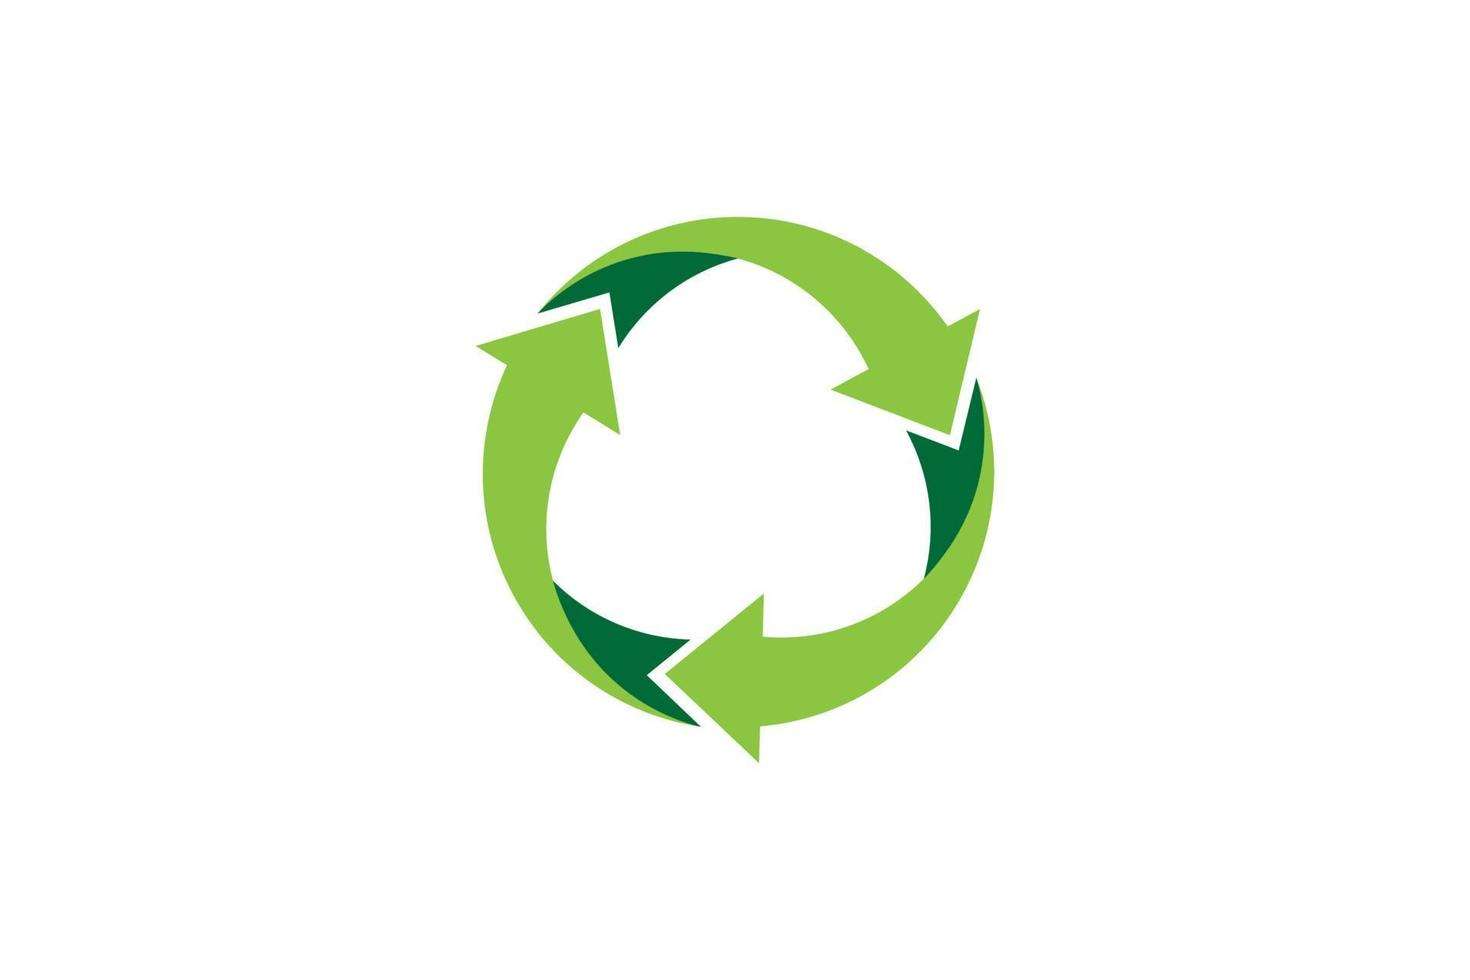 Who Designed The Recycle Logo 